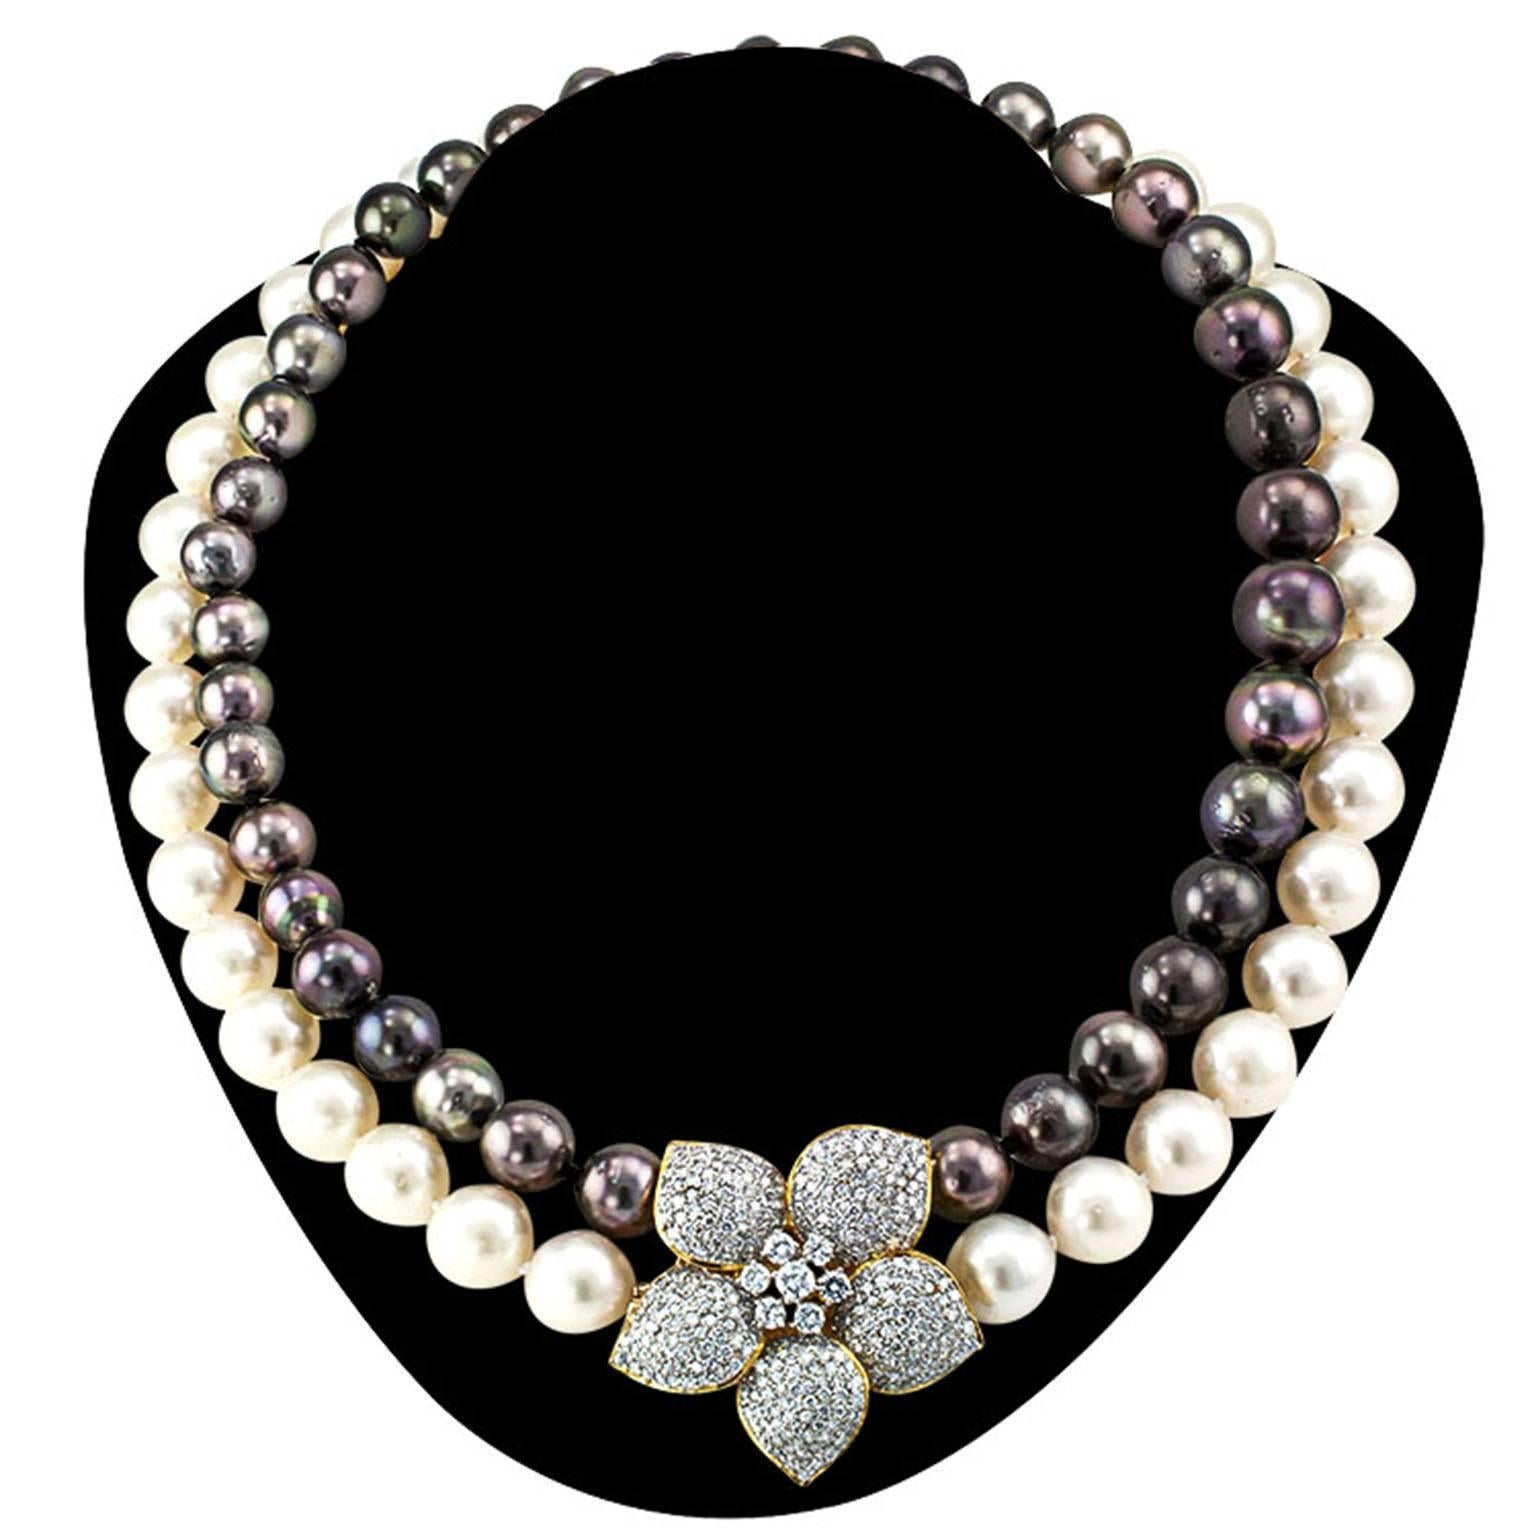 Tahitian and South Sea Cultured Pearl Necklace With Diamond Flower Clasp

The most exotic gems from the sea were gathered for this nested cultured pearl necklace comprising a strand of thirty eight Tahitian pearls measuring 10 to 14.5 mm in